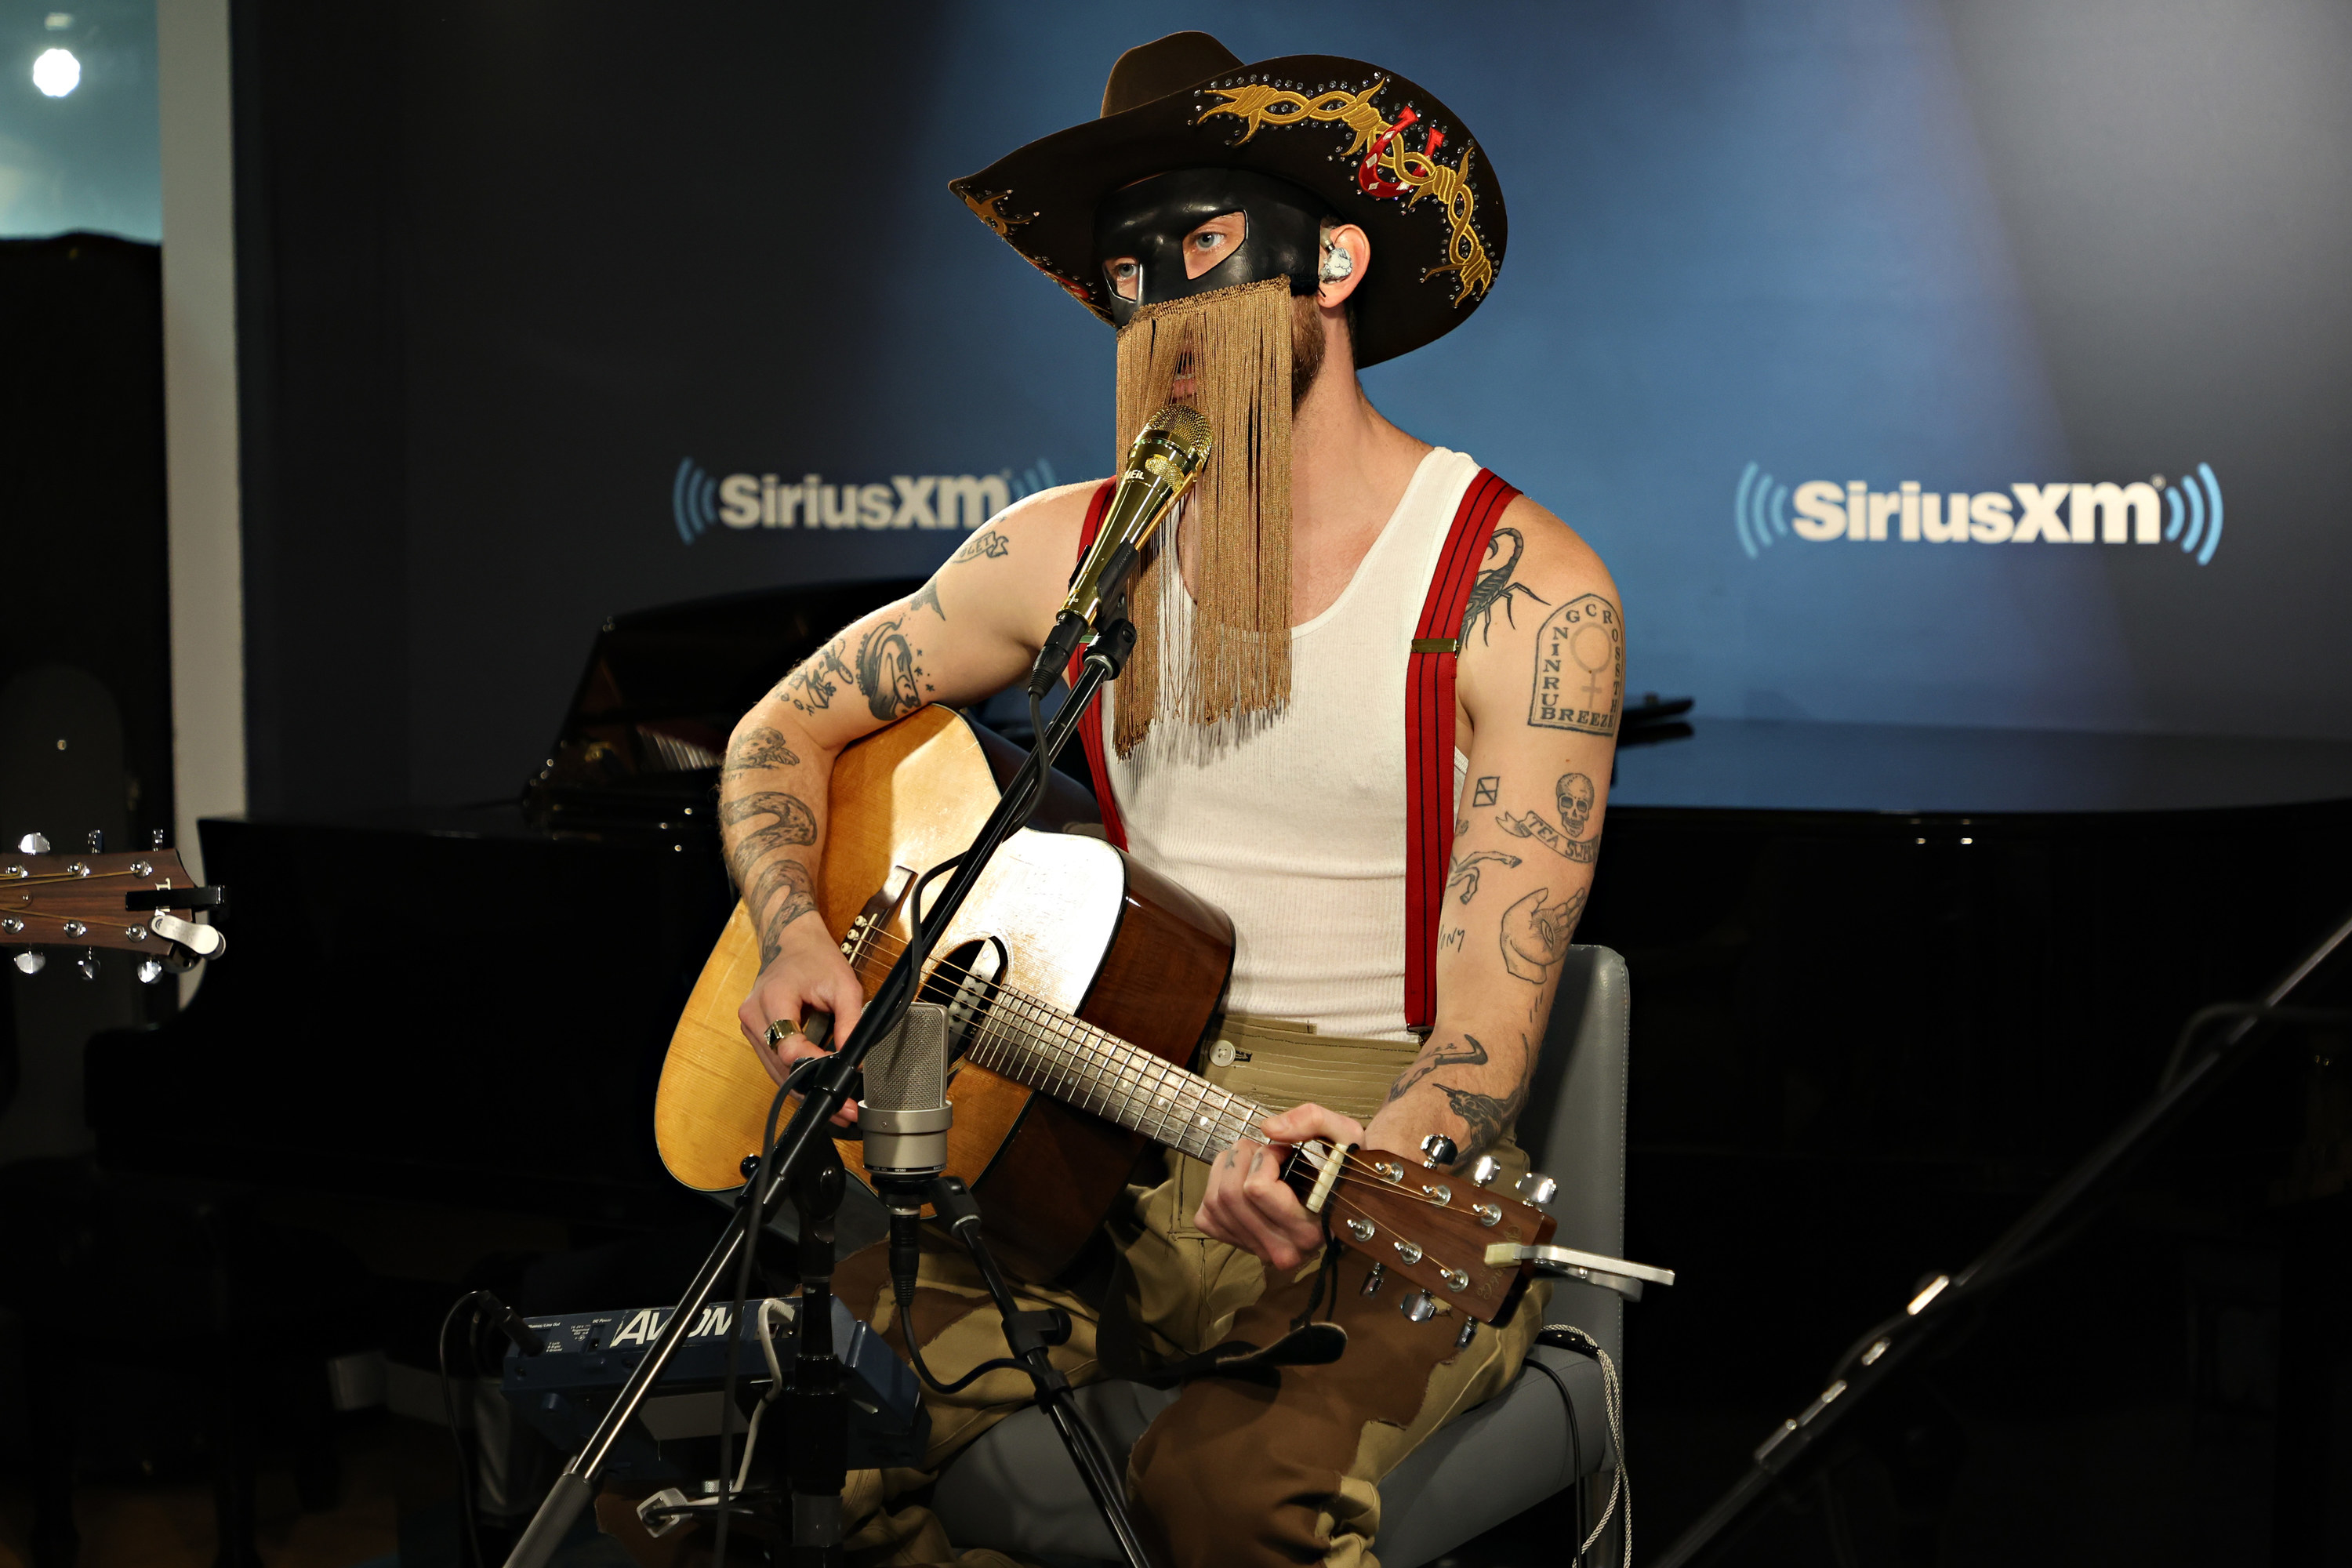 Orville singing into a microphone and playing a guitar in the SiriusXM studios